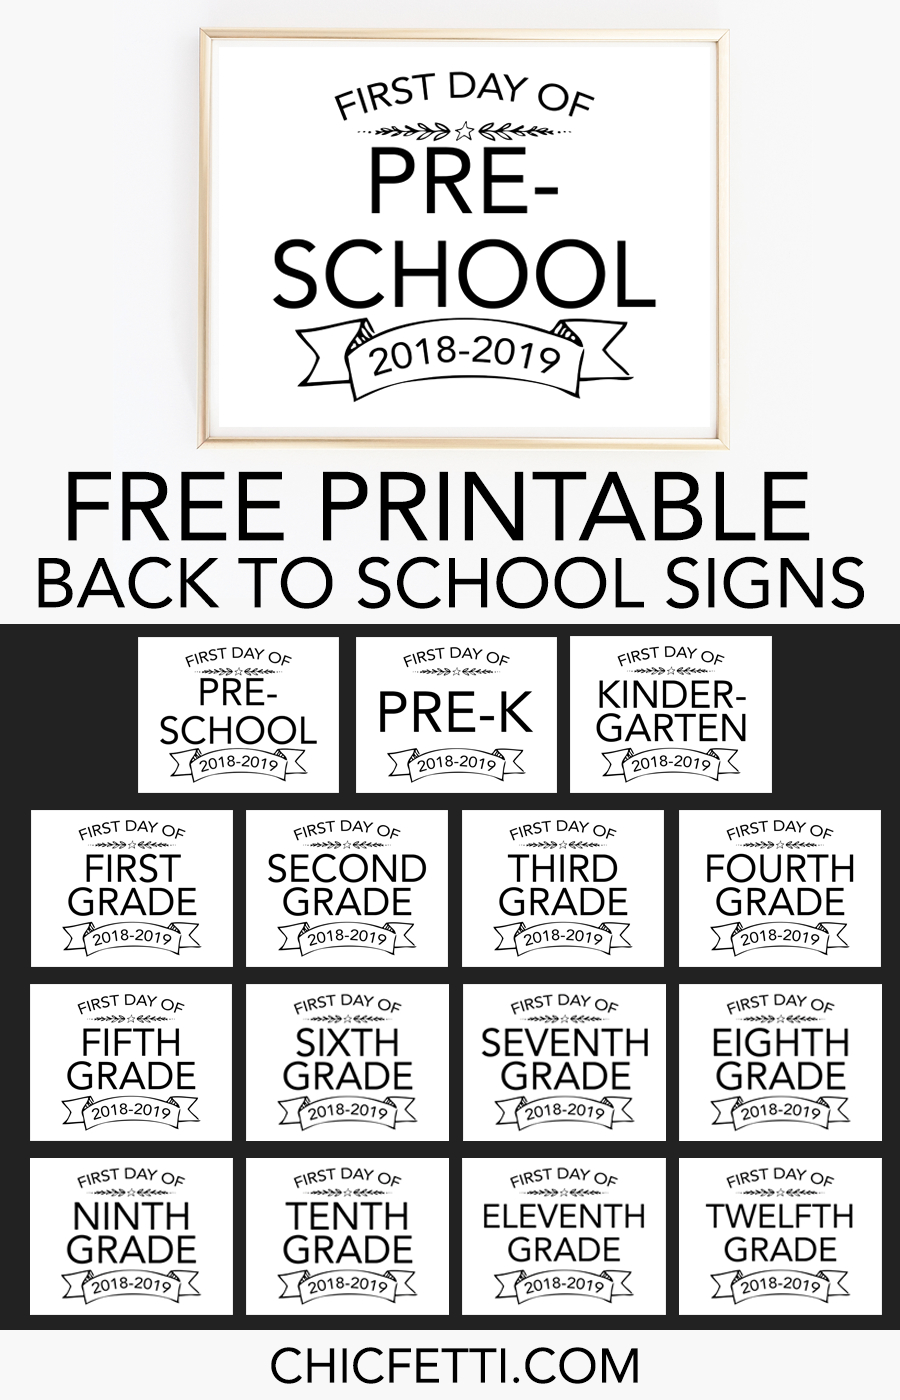 Printable Back To School Signs - Print Our Free First Day Of School - Free Printable First Day Of School Signs 2018